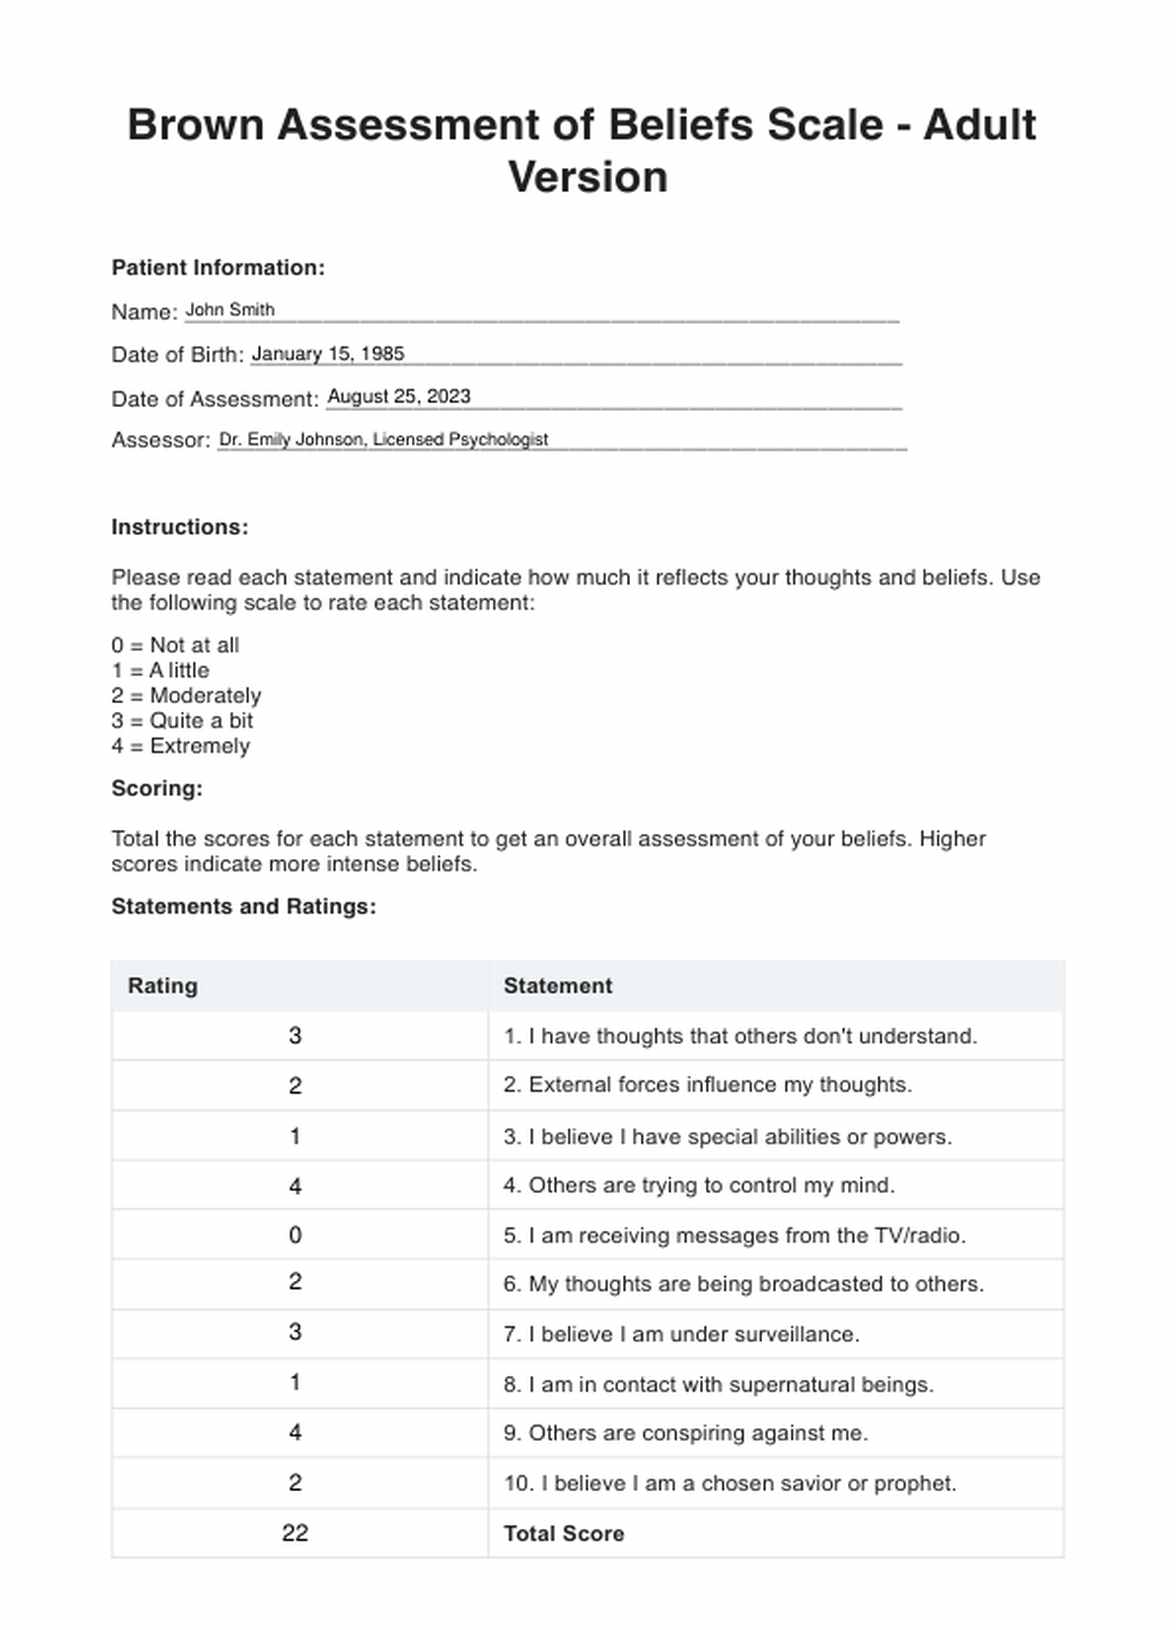 Brown Assessment of Beliefs Scale - Adult Version PDF Example